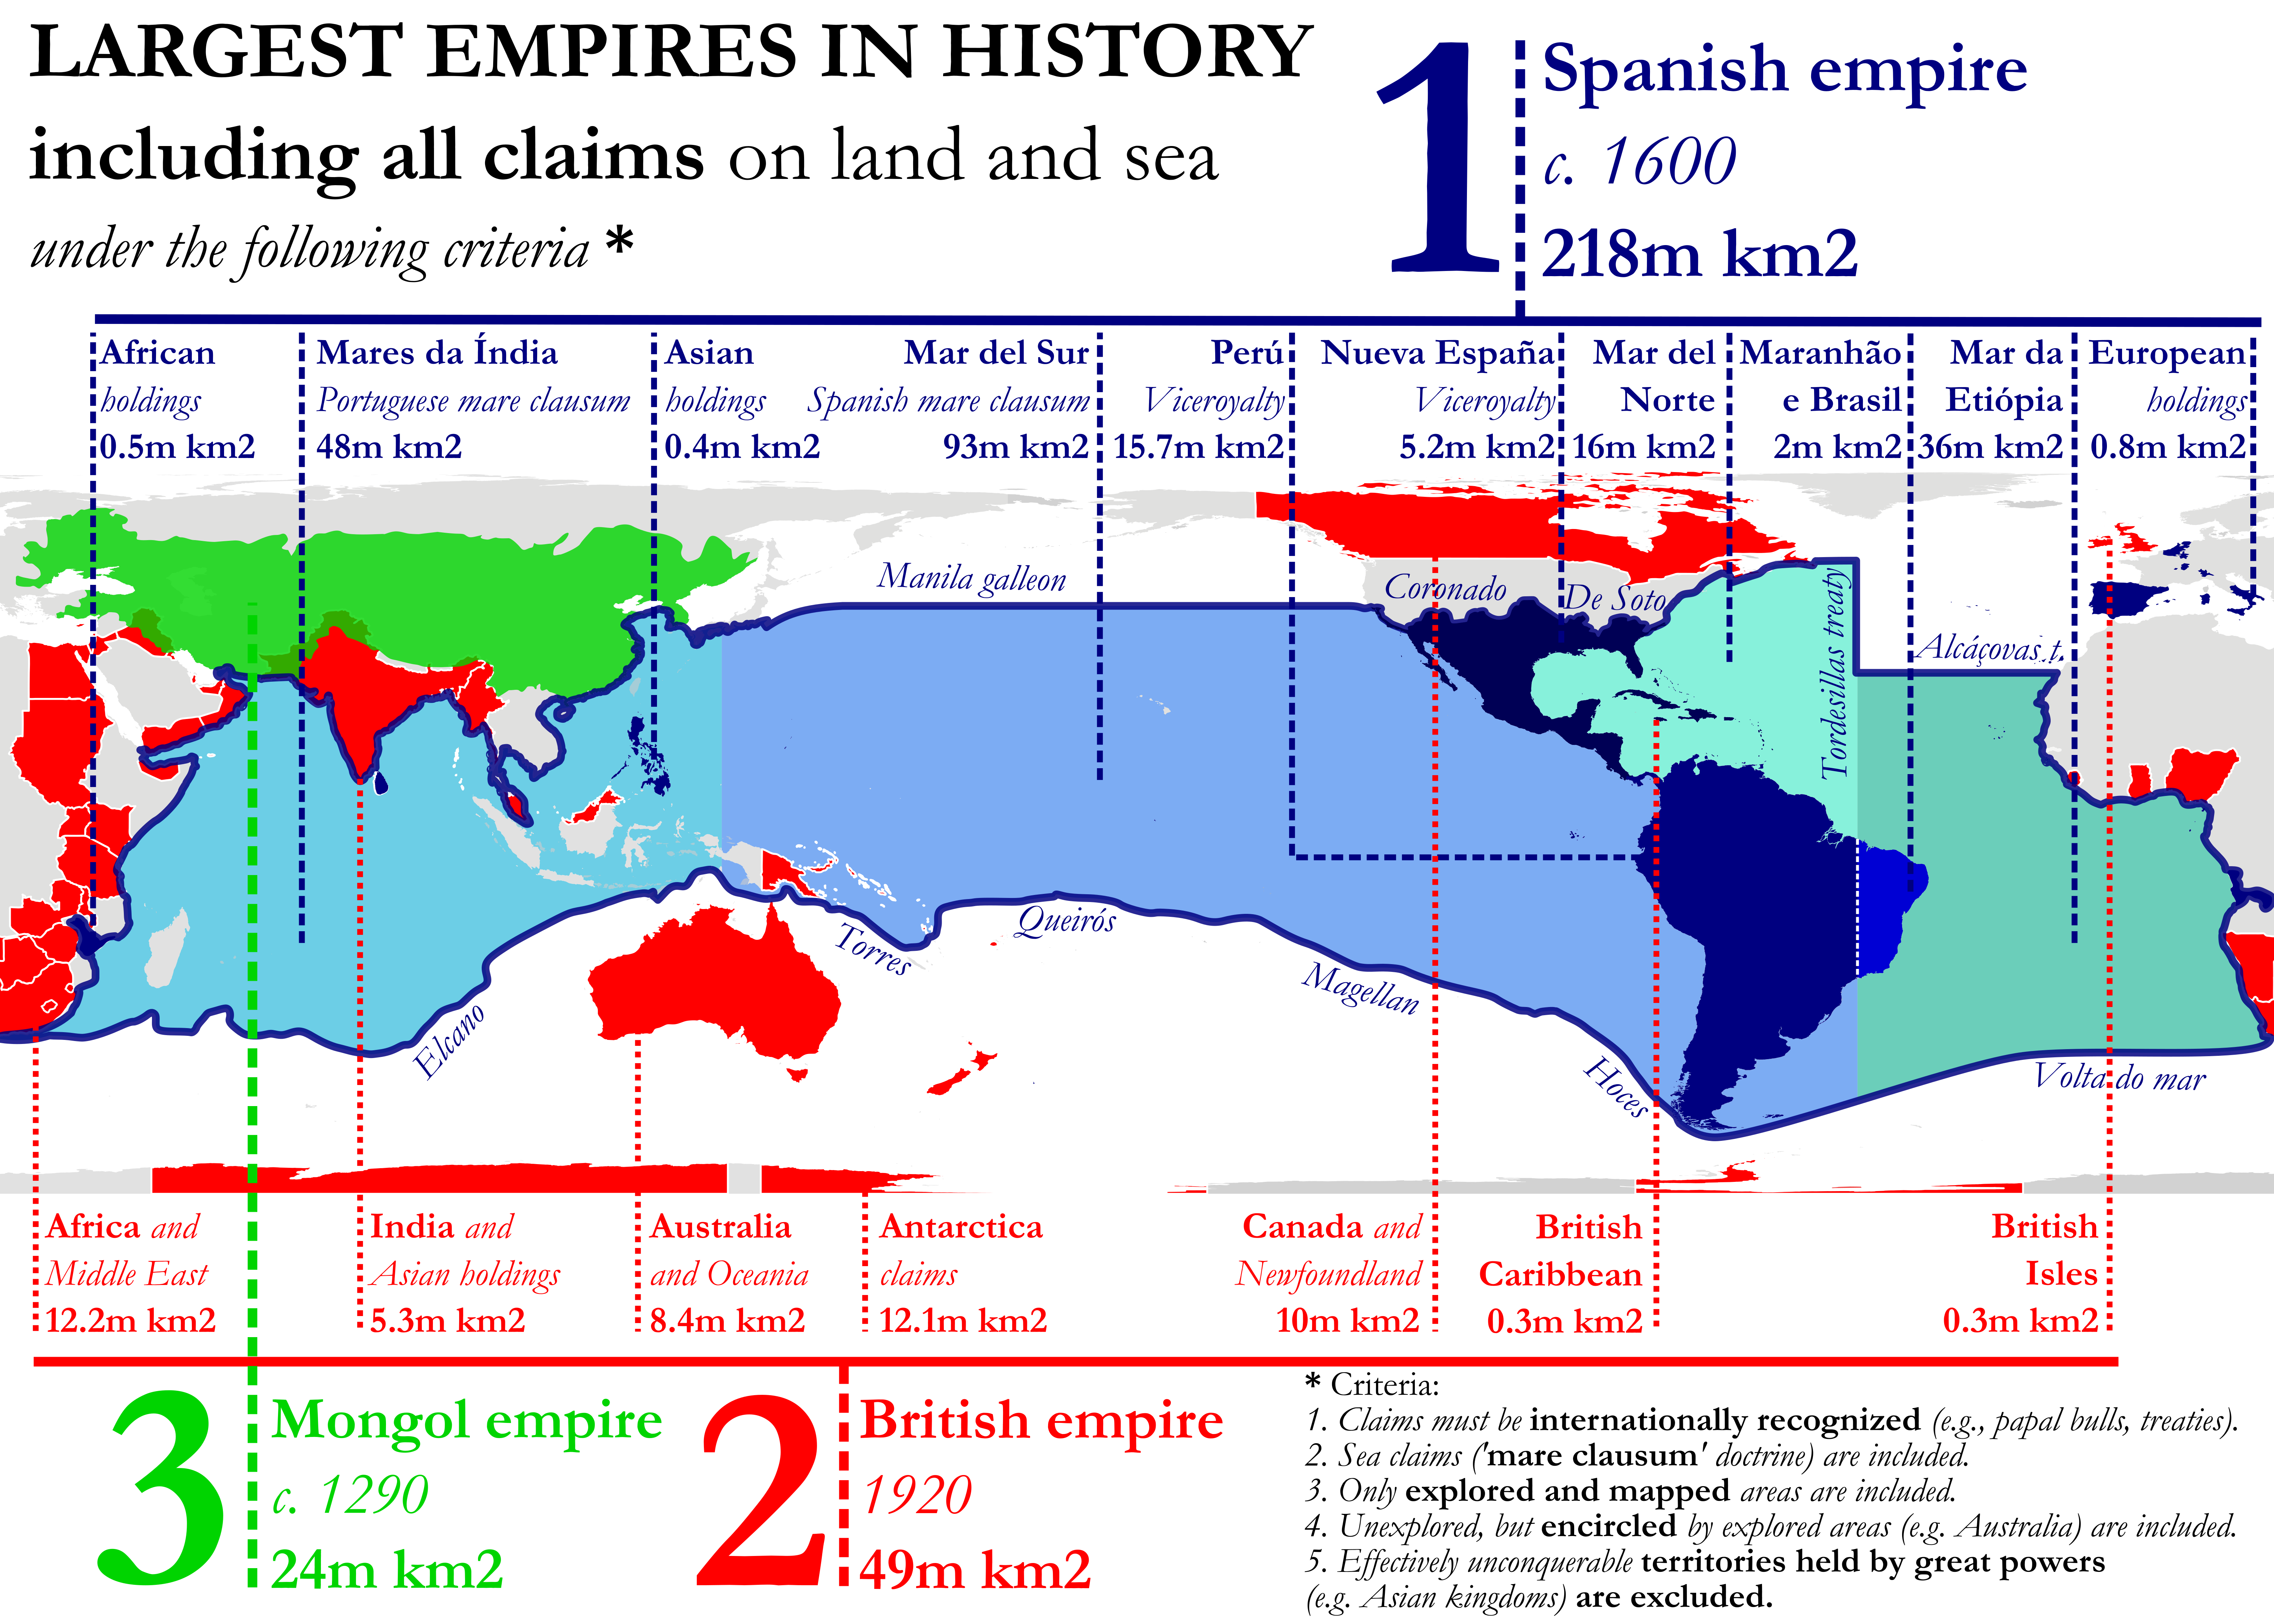 The 19 greatest empires in history